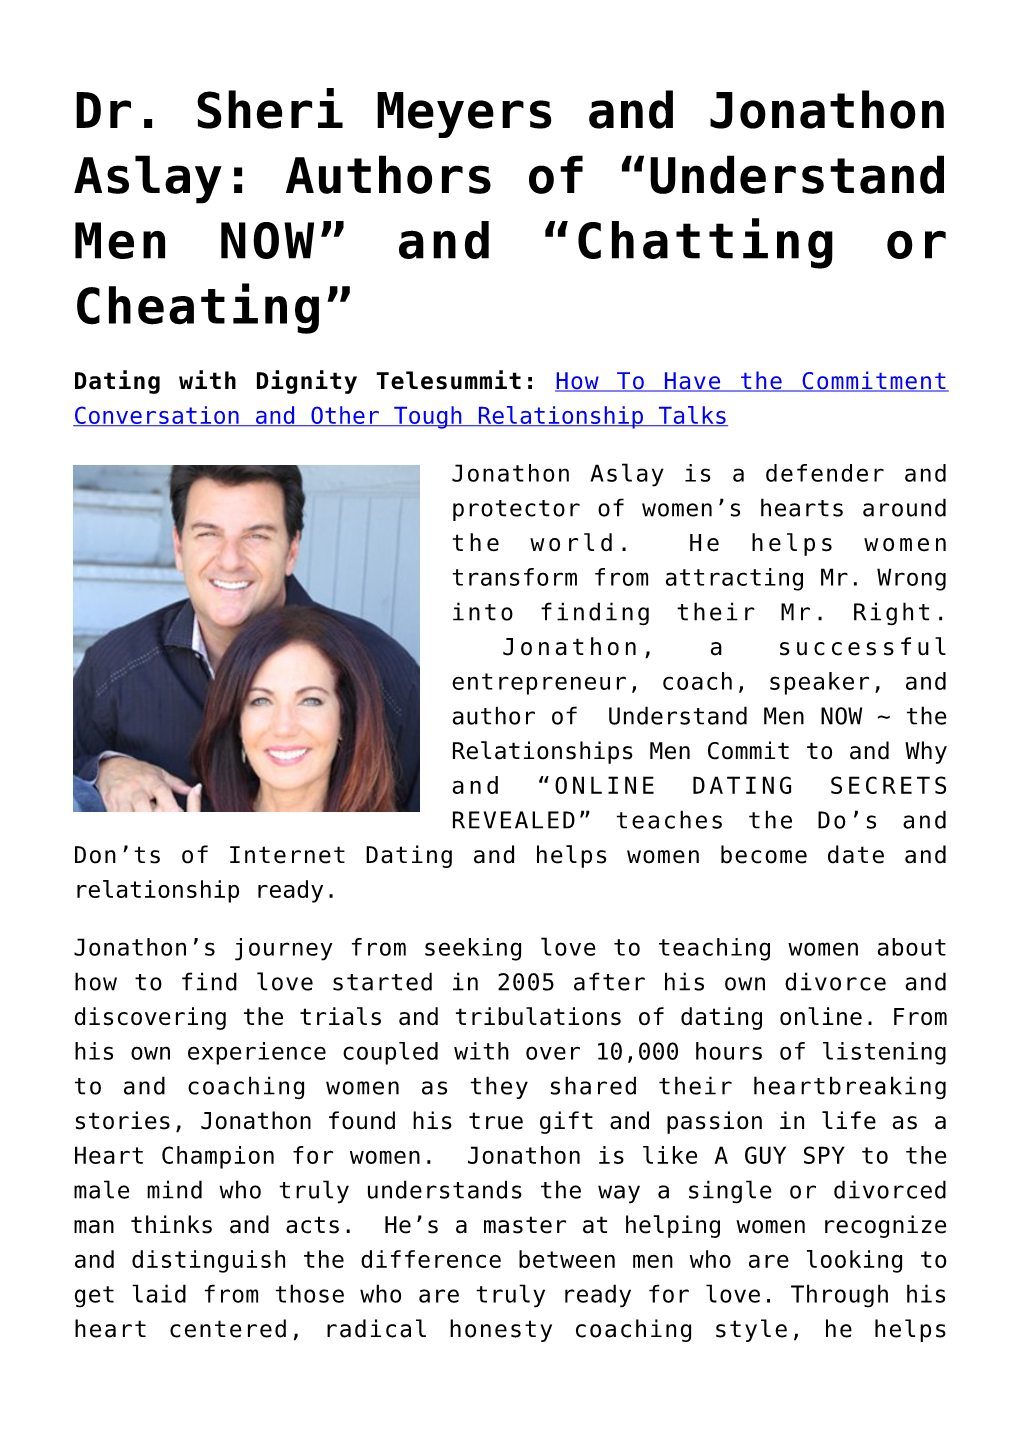 Dr. Sheri Meyers and Jonathon Aslay: Authors of “Understand Men NOW” and “Chatting Or Cheating”